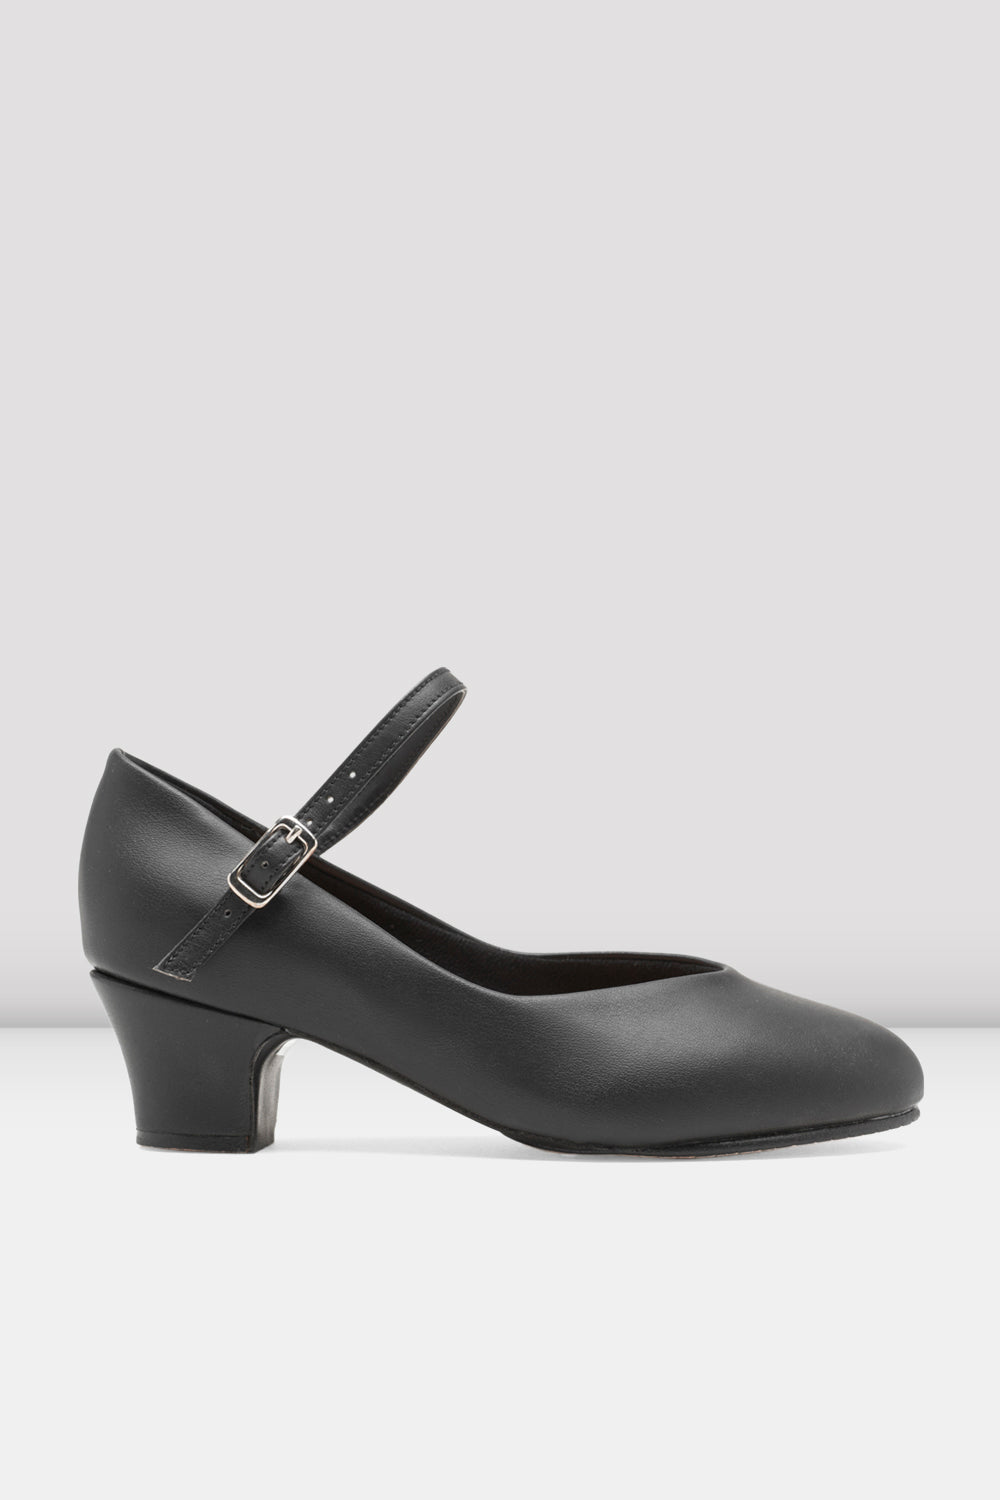 BLOCH Ladies Broadway-Lo Character Shoes, Black Synthetic Leather